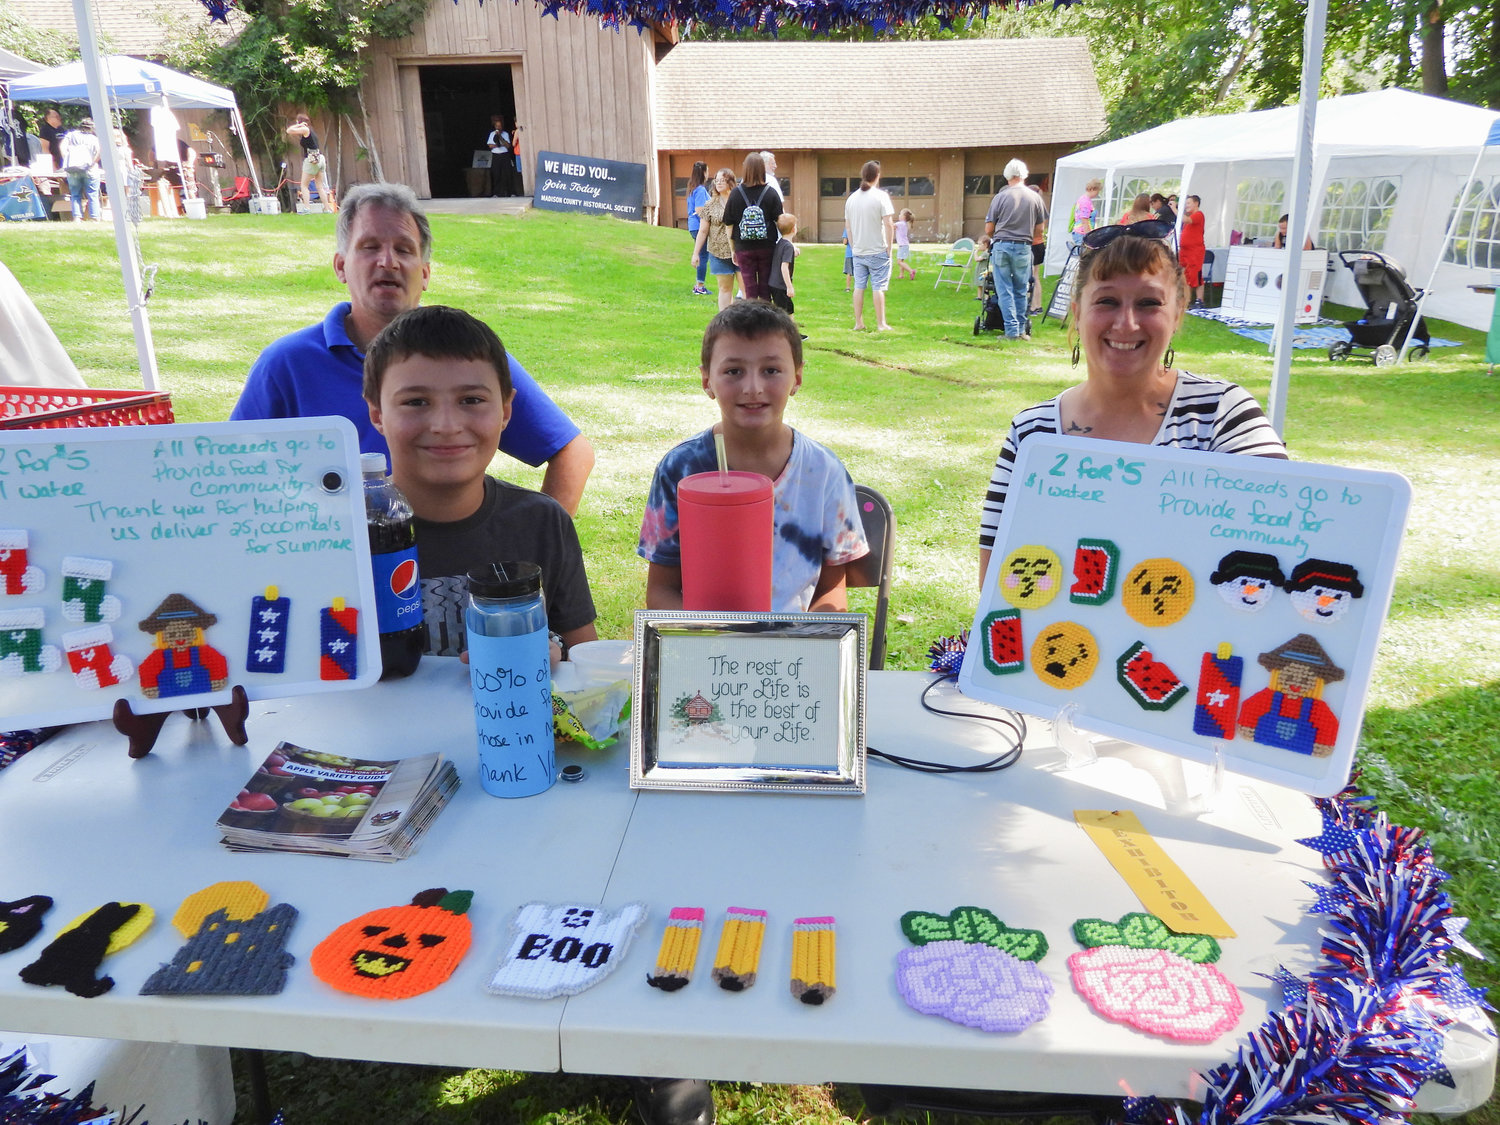 The 58th Annual Madison County Craft Festival saw artisans of every craft under the sun selling their wares at the Madison County Historical Society in Oneida on Saturday, Sept. 10. Karing Kitchen was in attendance, selling handcrafted goods for the upcoming holidays.